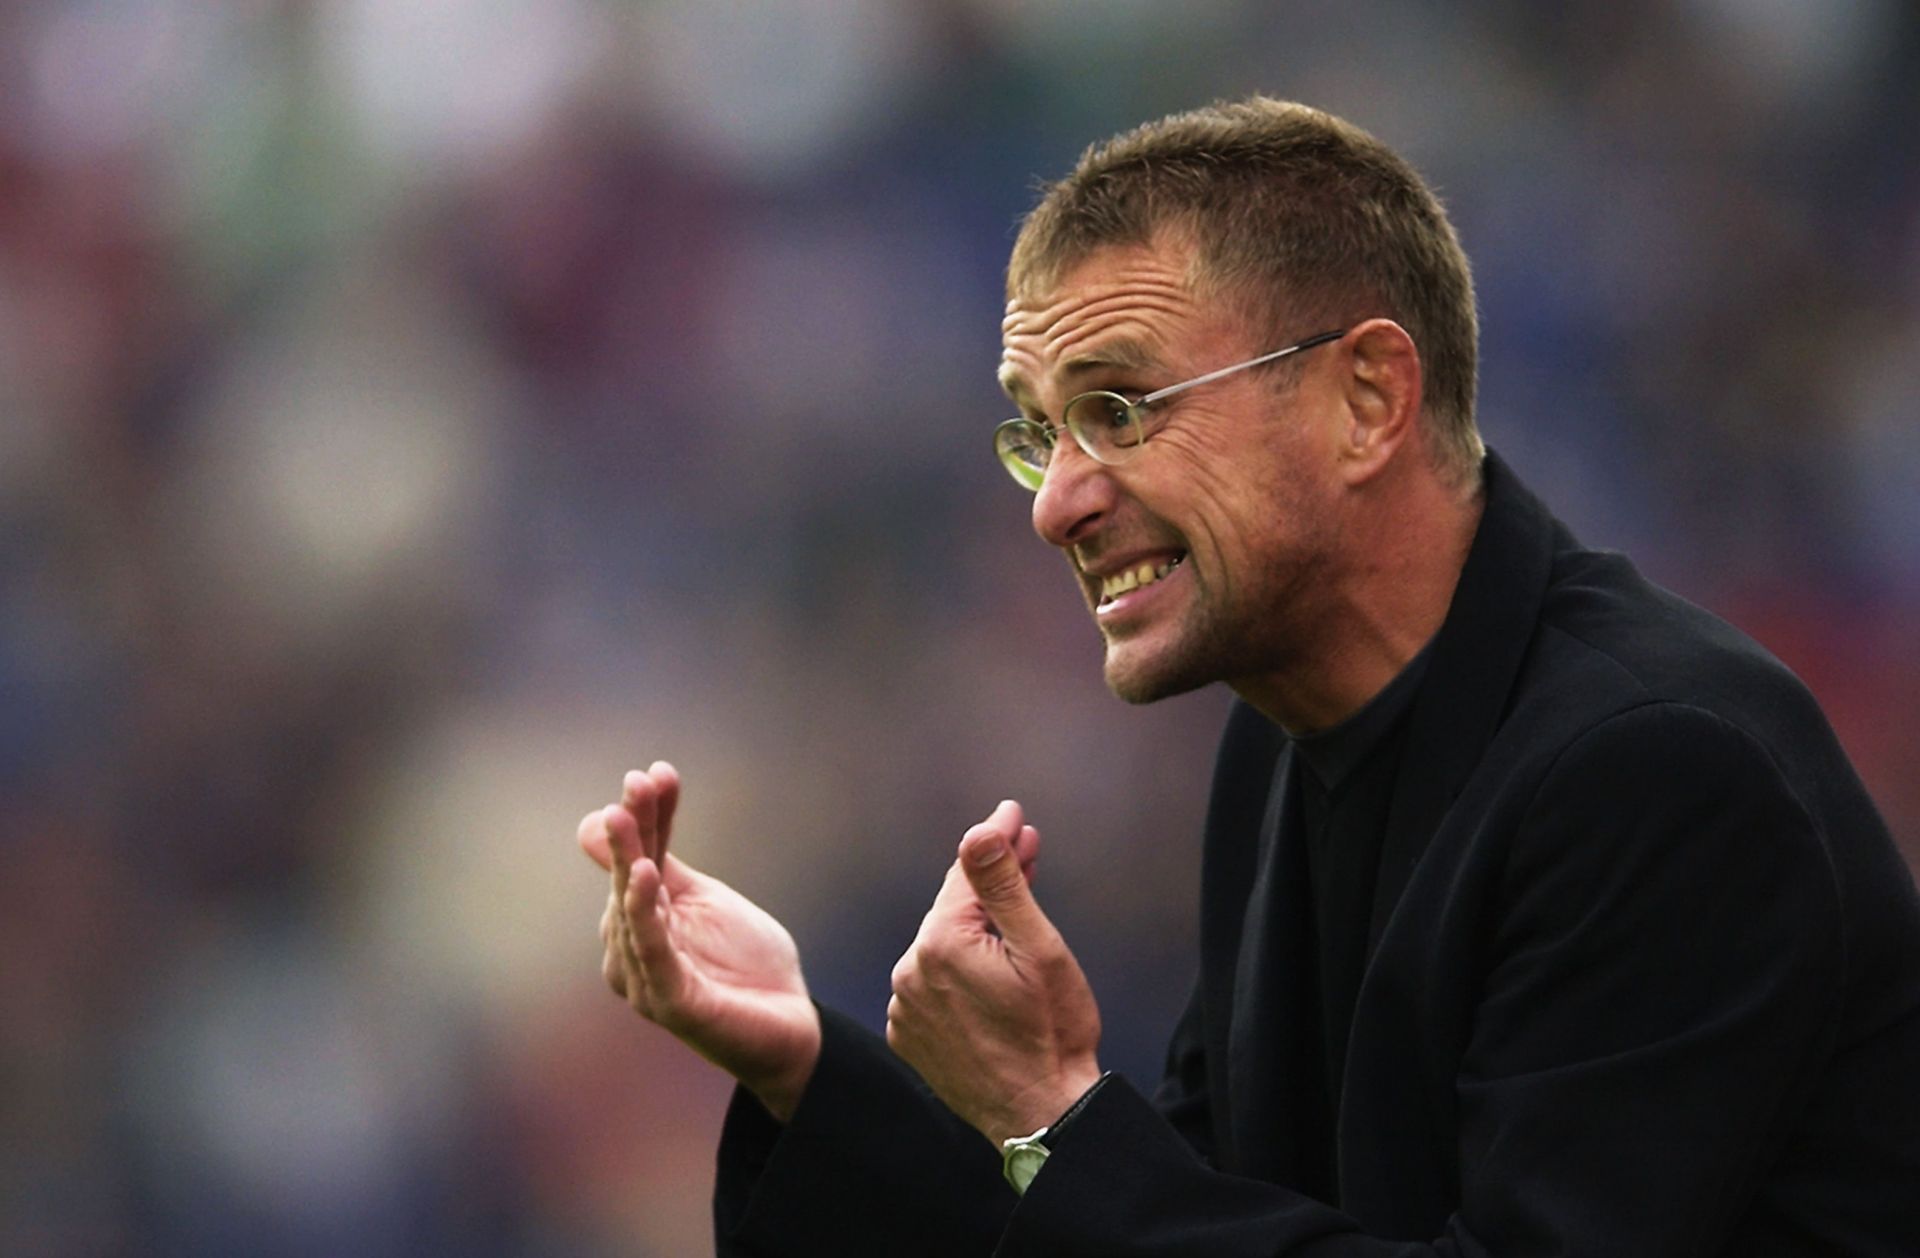 Ralf Rangnick during his time as the coach of Hannover 